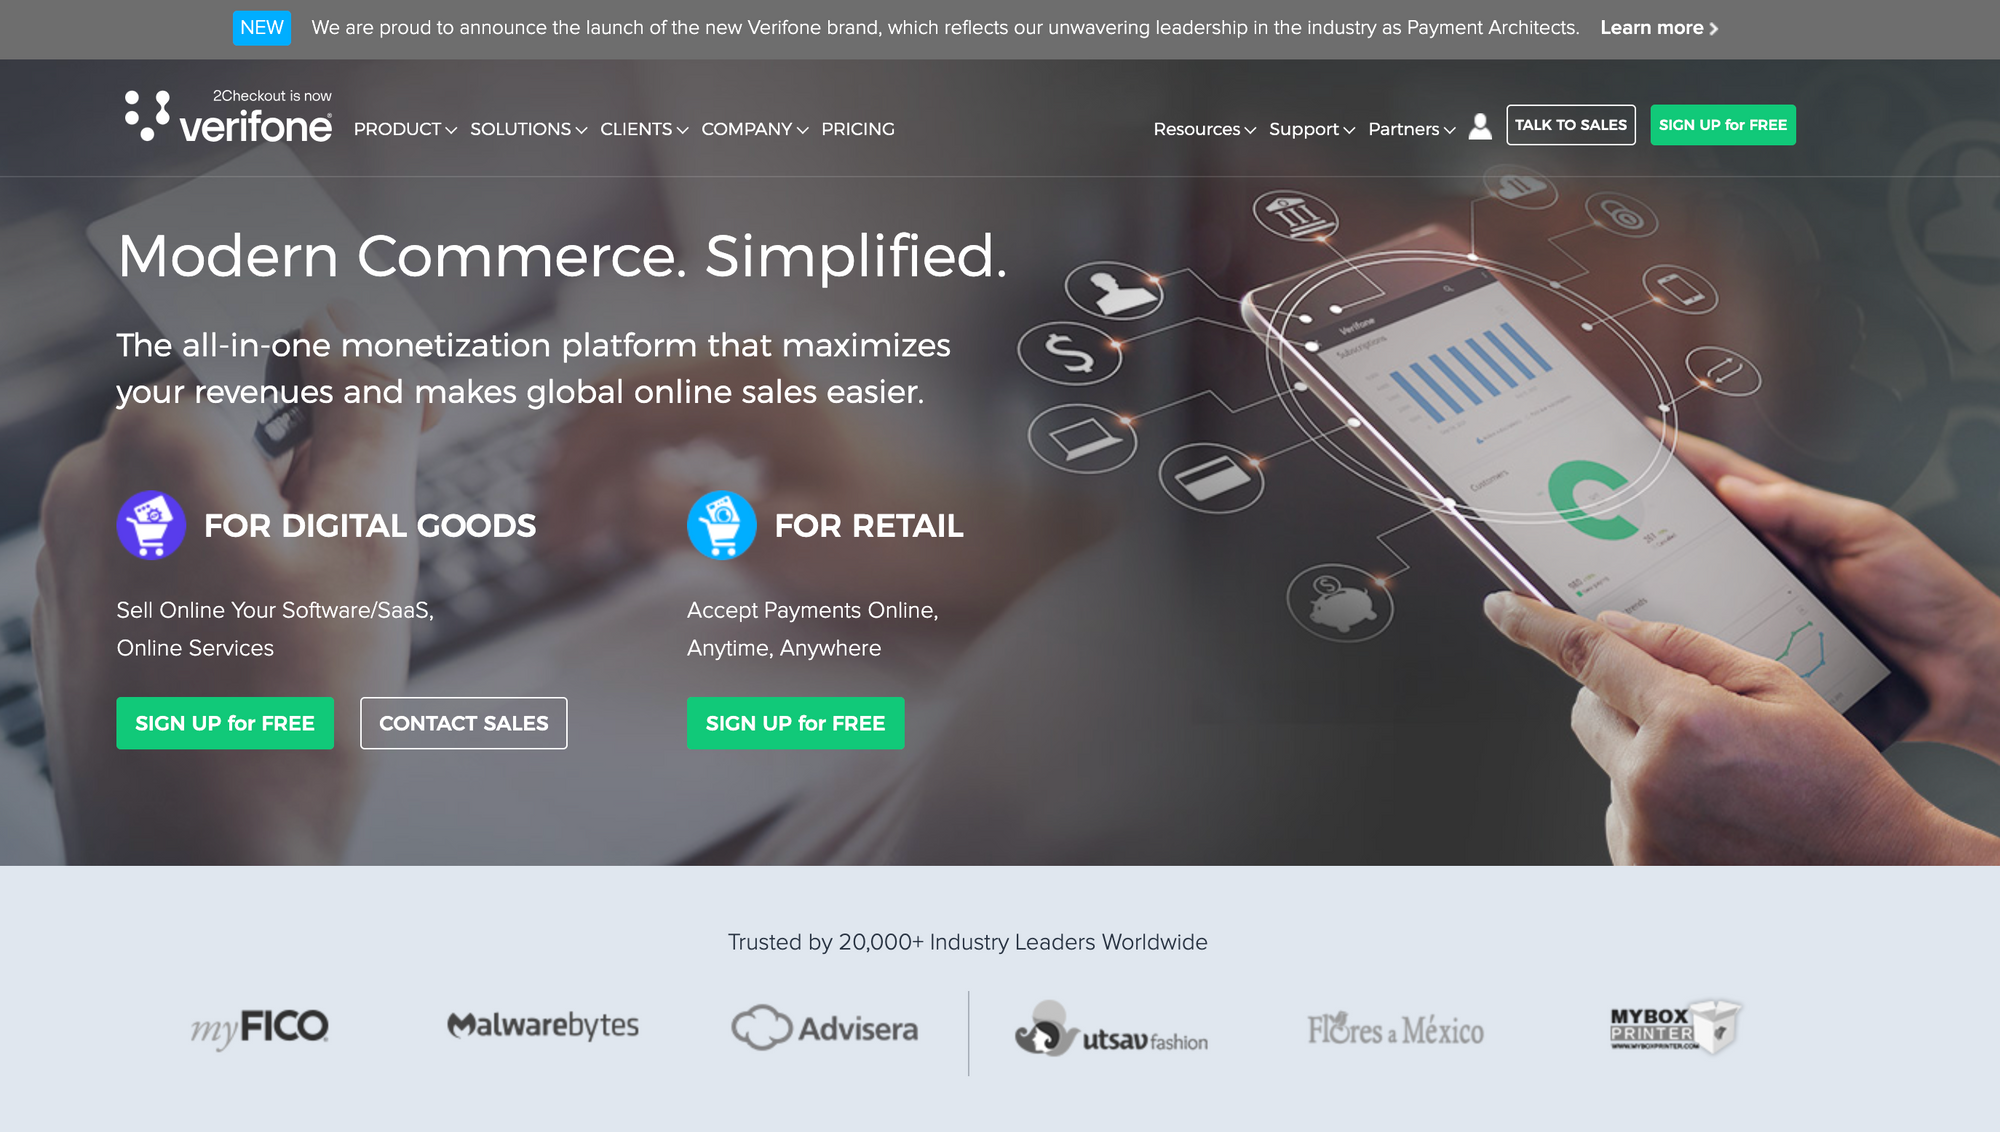 7 Top Magento Payment Gateways in 2024